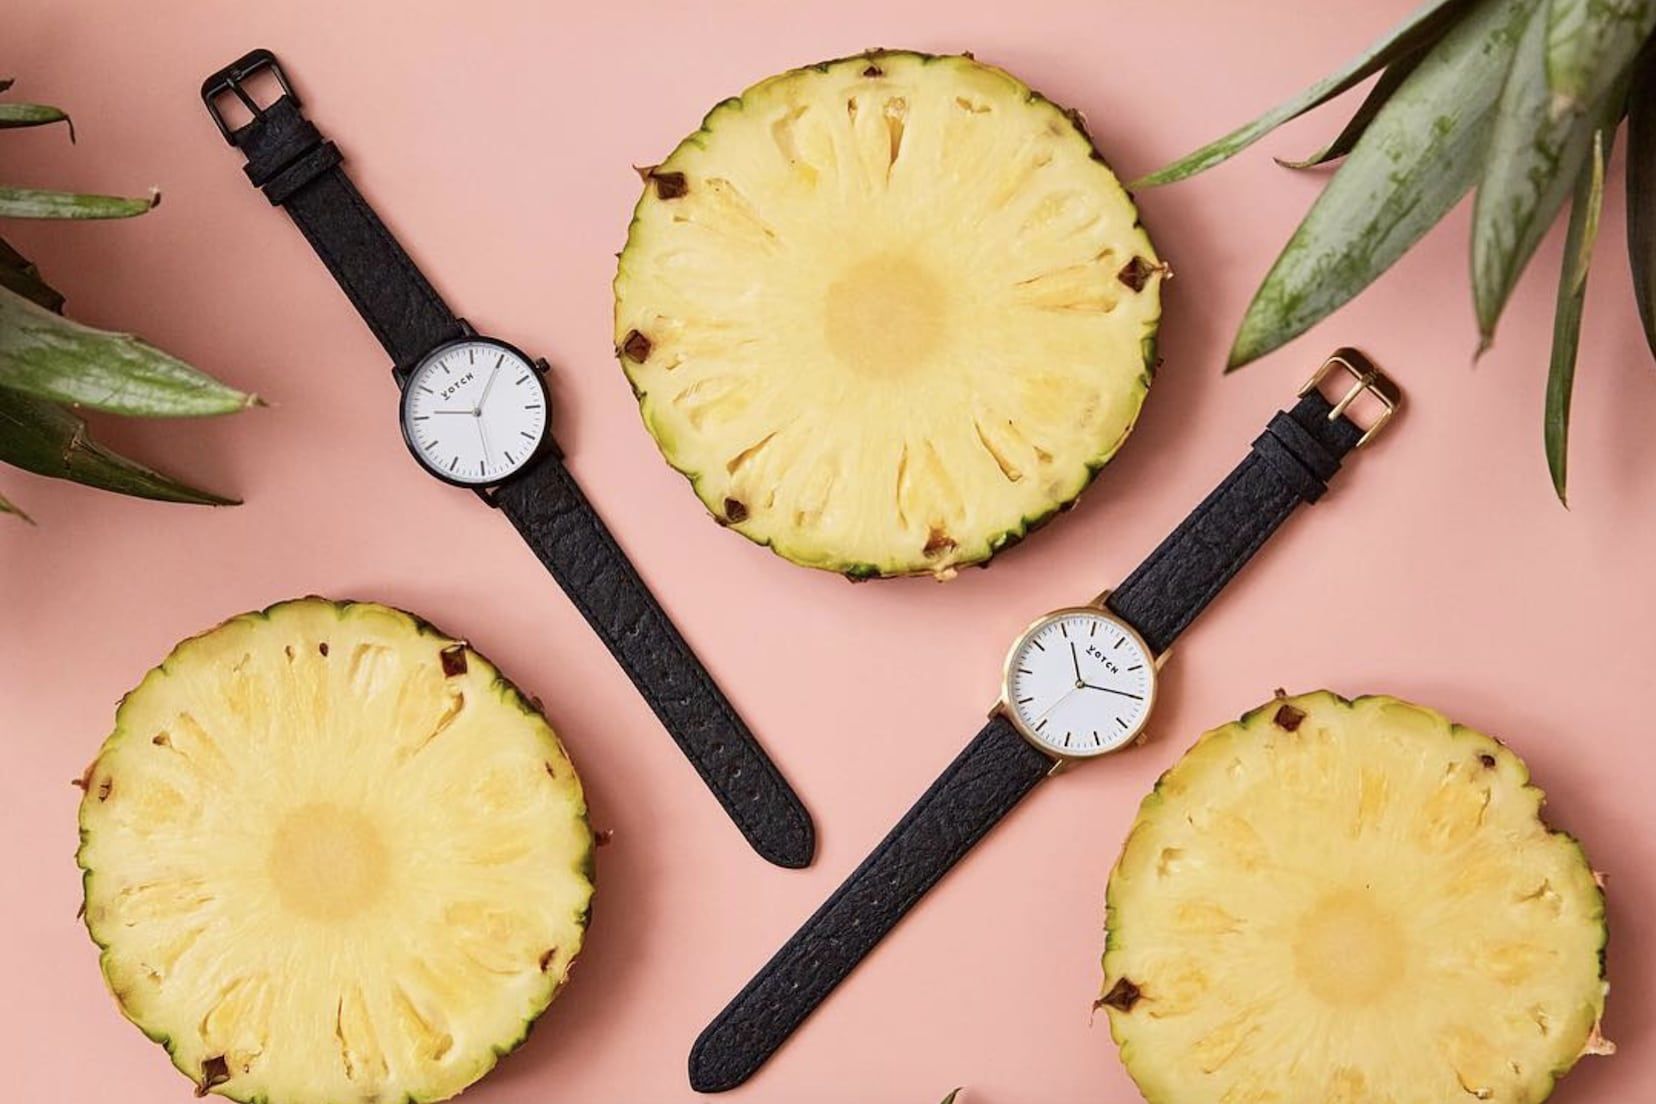 This newly-launched brand uses only pineapple-based leather to